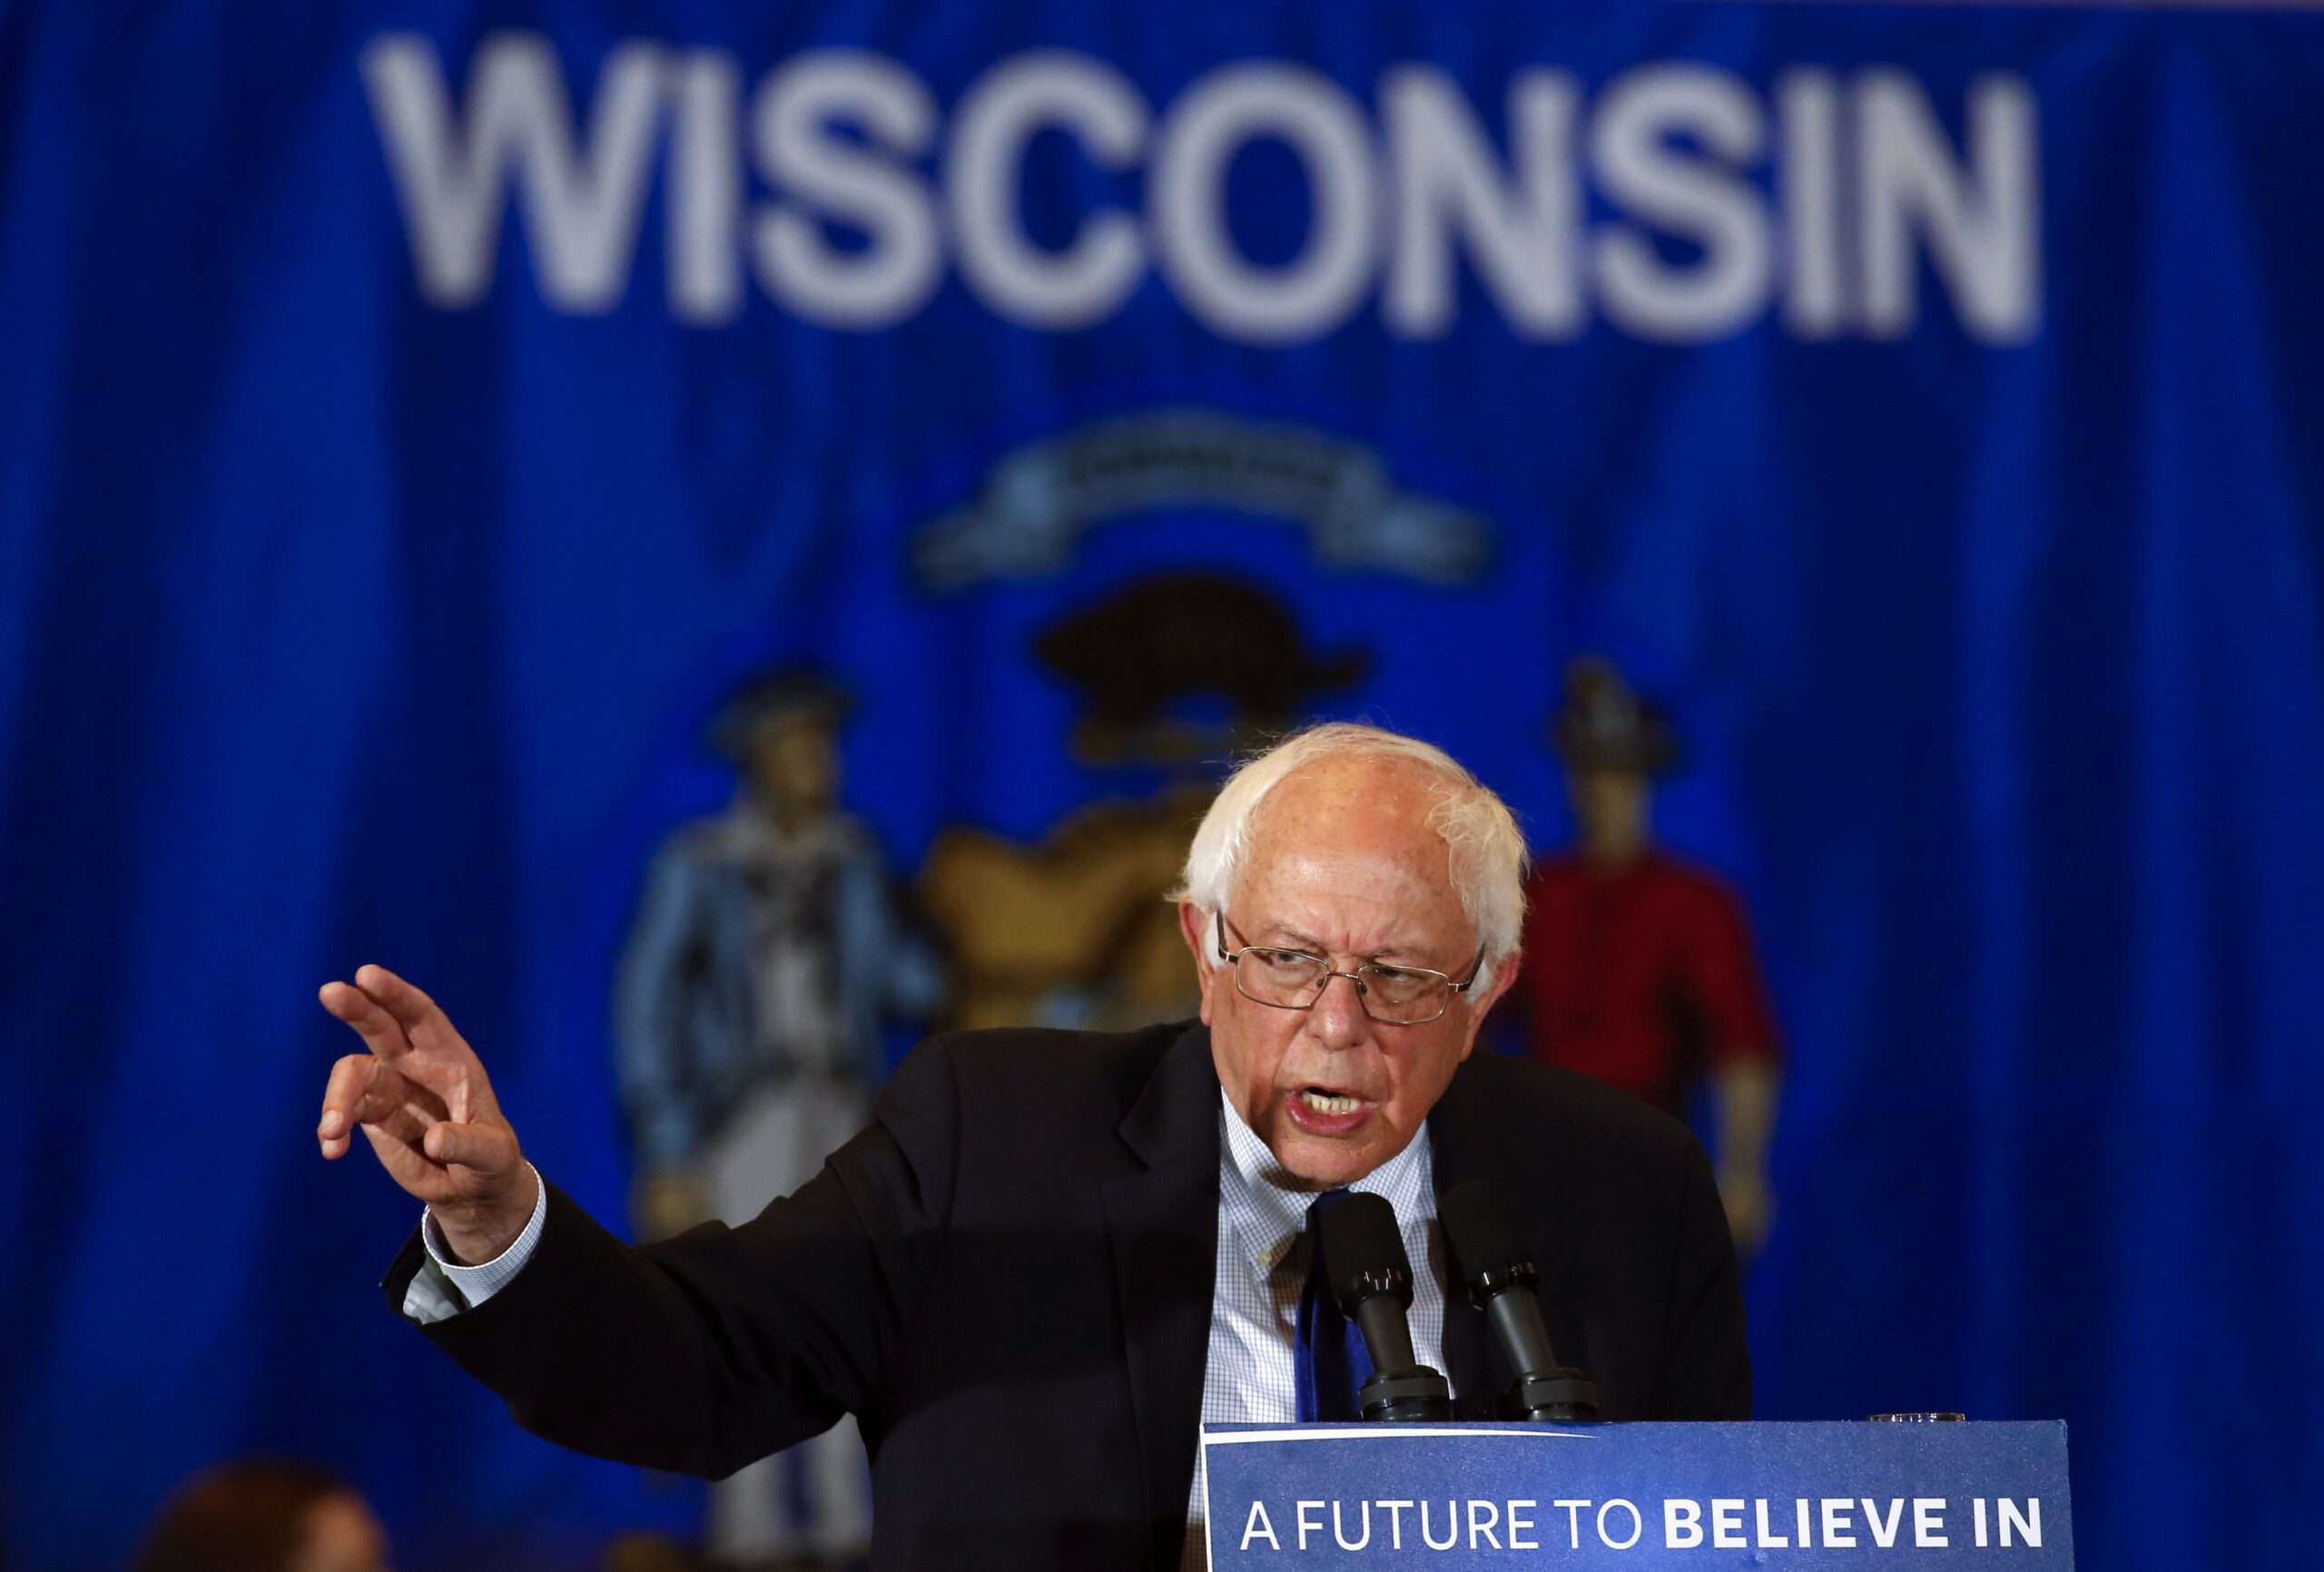 Bernie Sanders stumps for Democrats in Wisconsin as both sides make final get-out-the-vote push